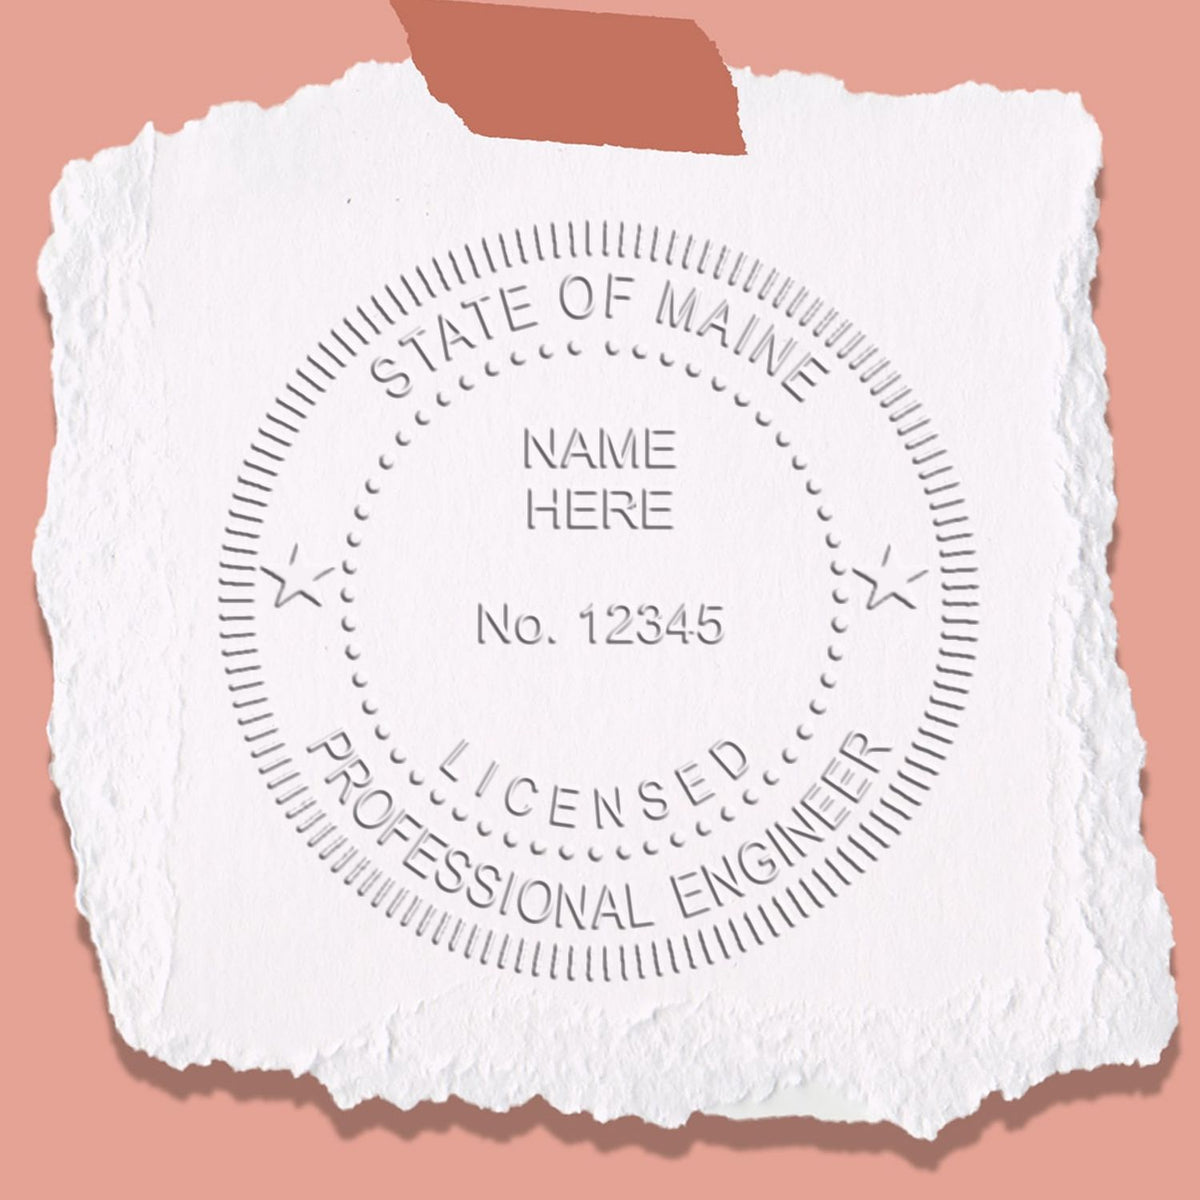 The Gift Maine Engineer Seal stamp impression comes to life with a crisp, detailed image stamped on paper - showcasing true professional quality.